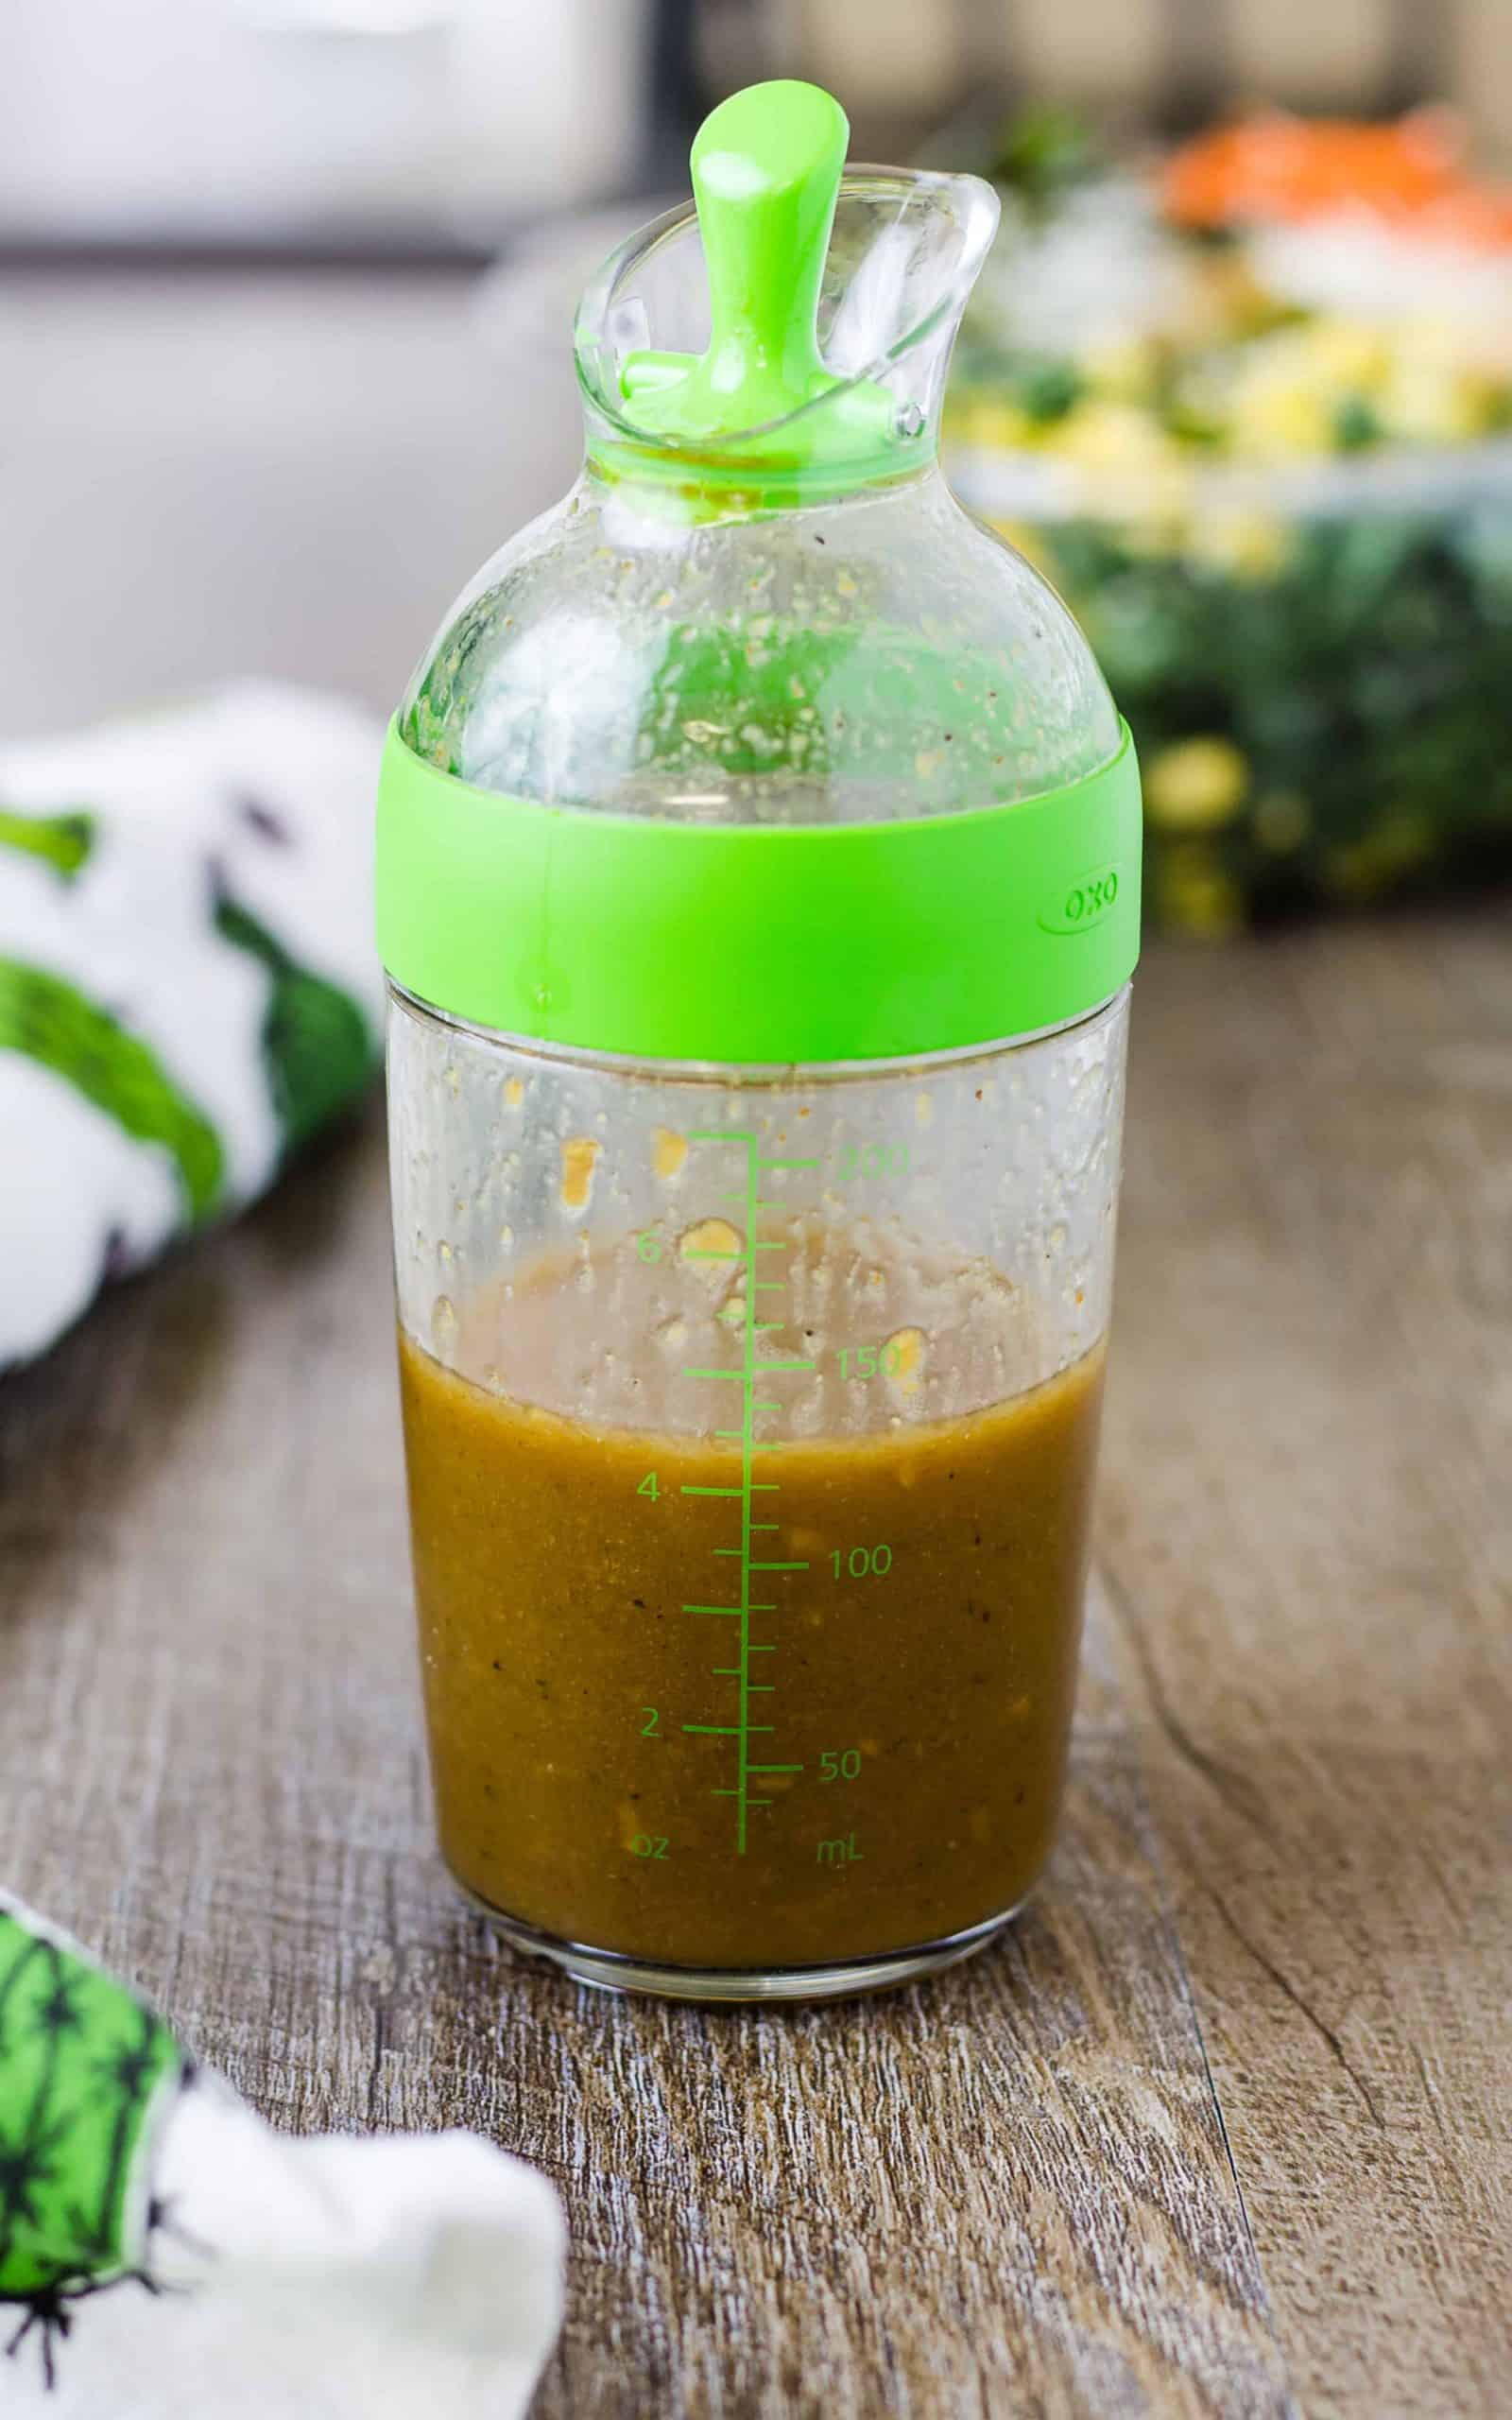 Delicious Homemade Balsamic Vinaigrette Salad Dressing in a dressing container on a wood surface